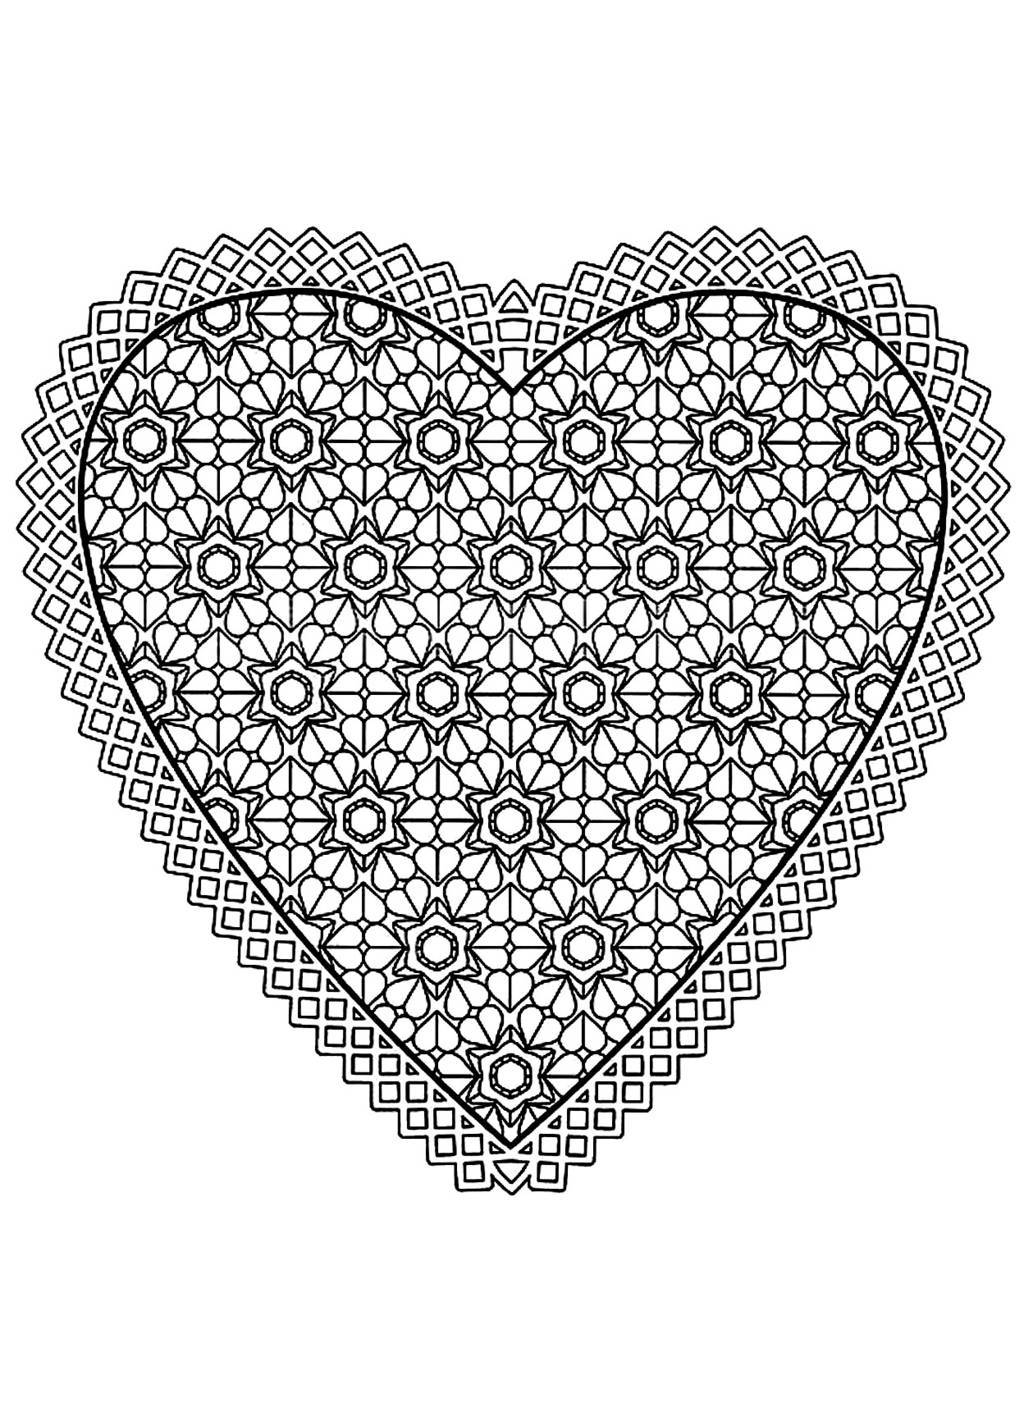 Free Mandala Difficult Adult To Print Heart Coloring Page